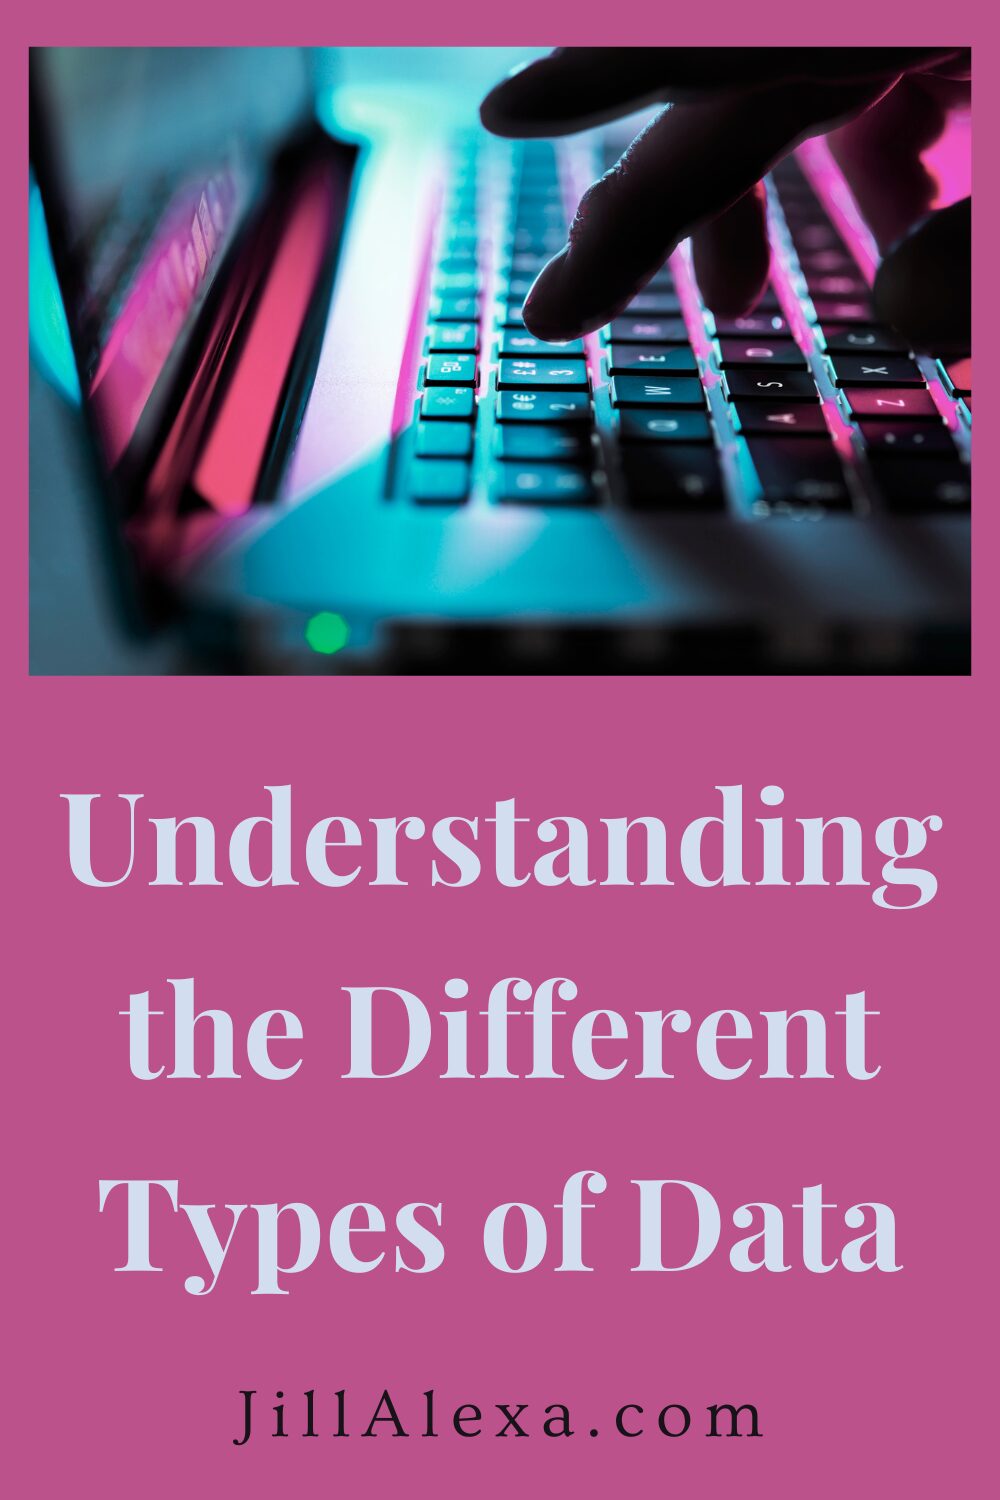 Understanding the Different Types of Data | Types of Data pin